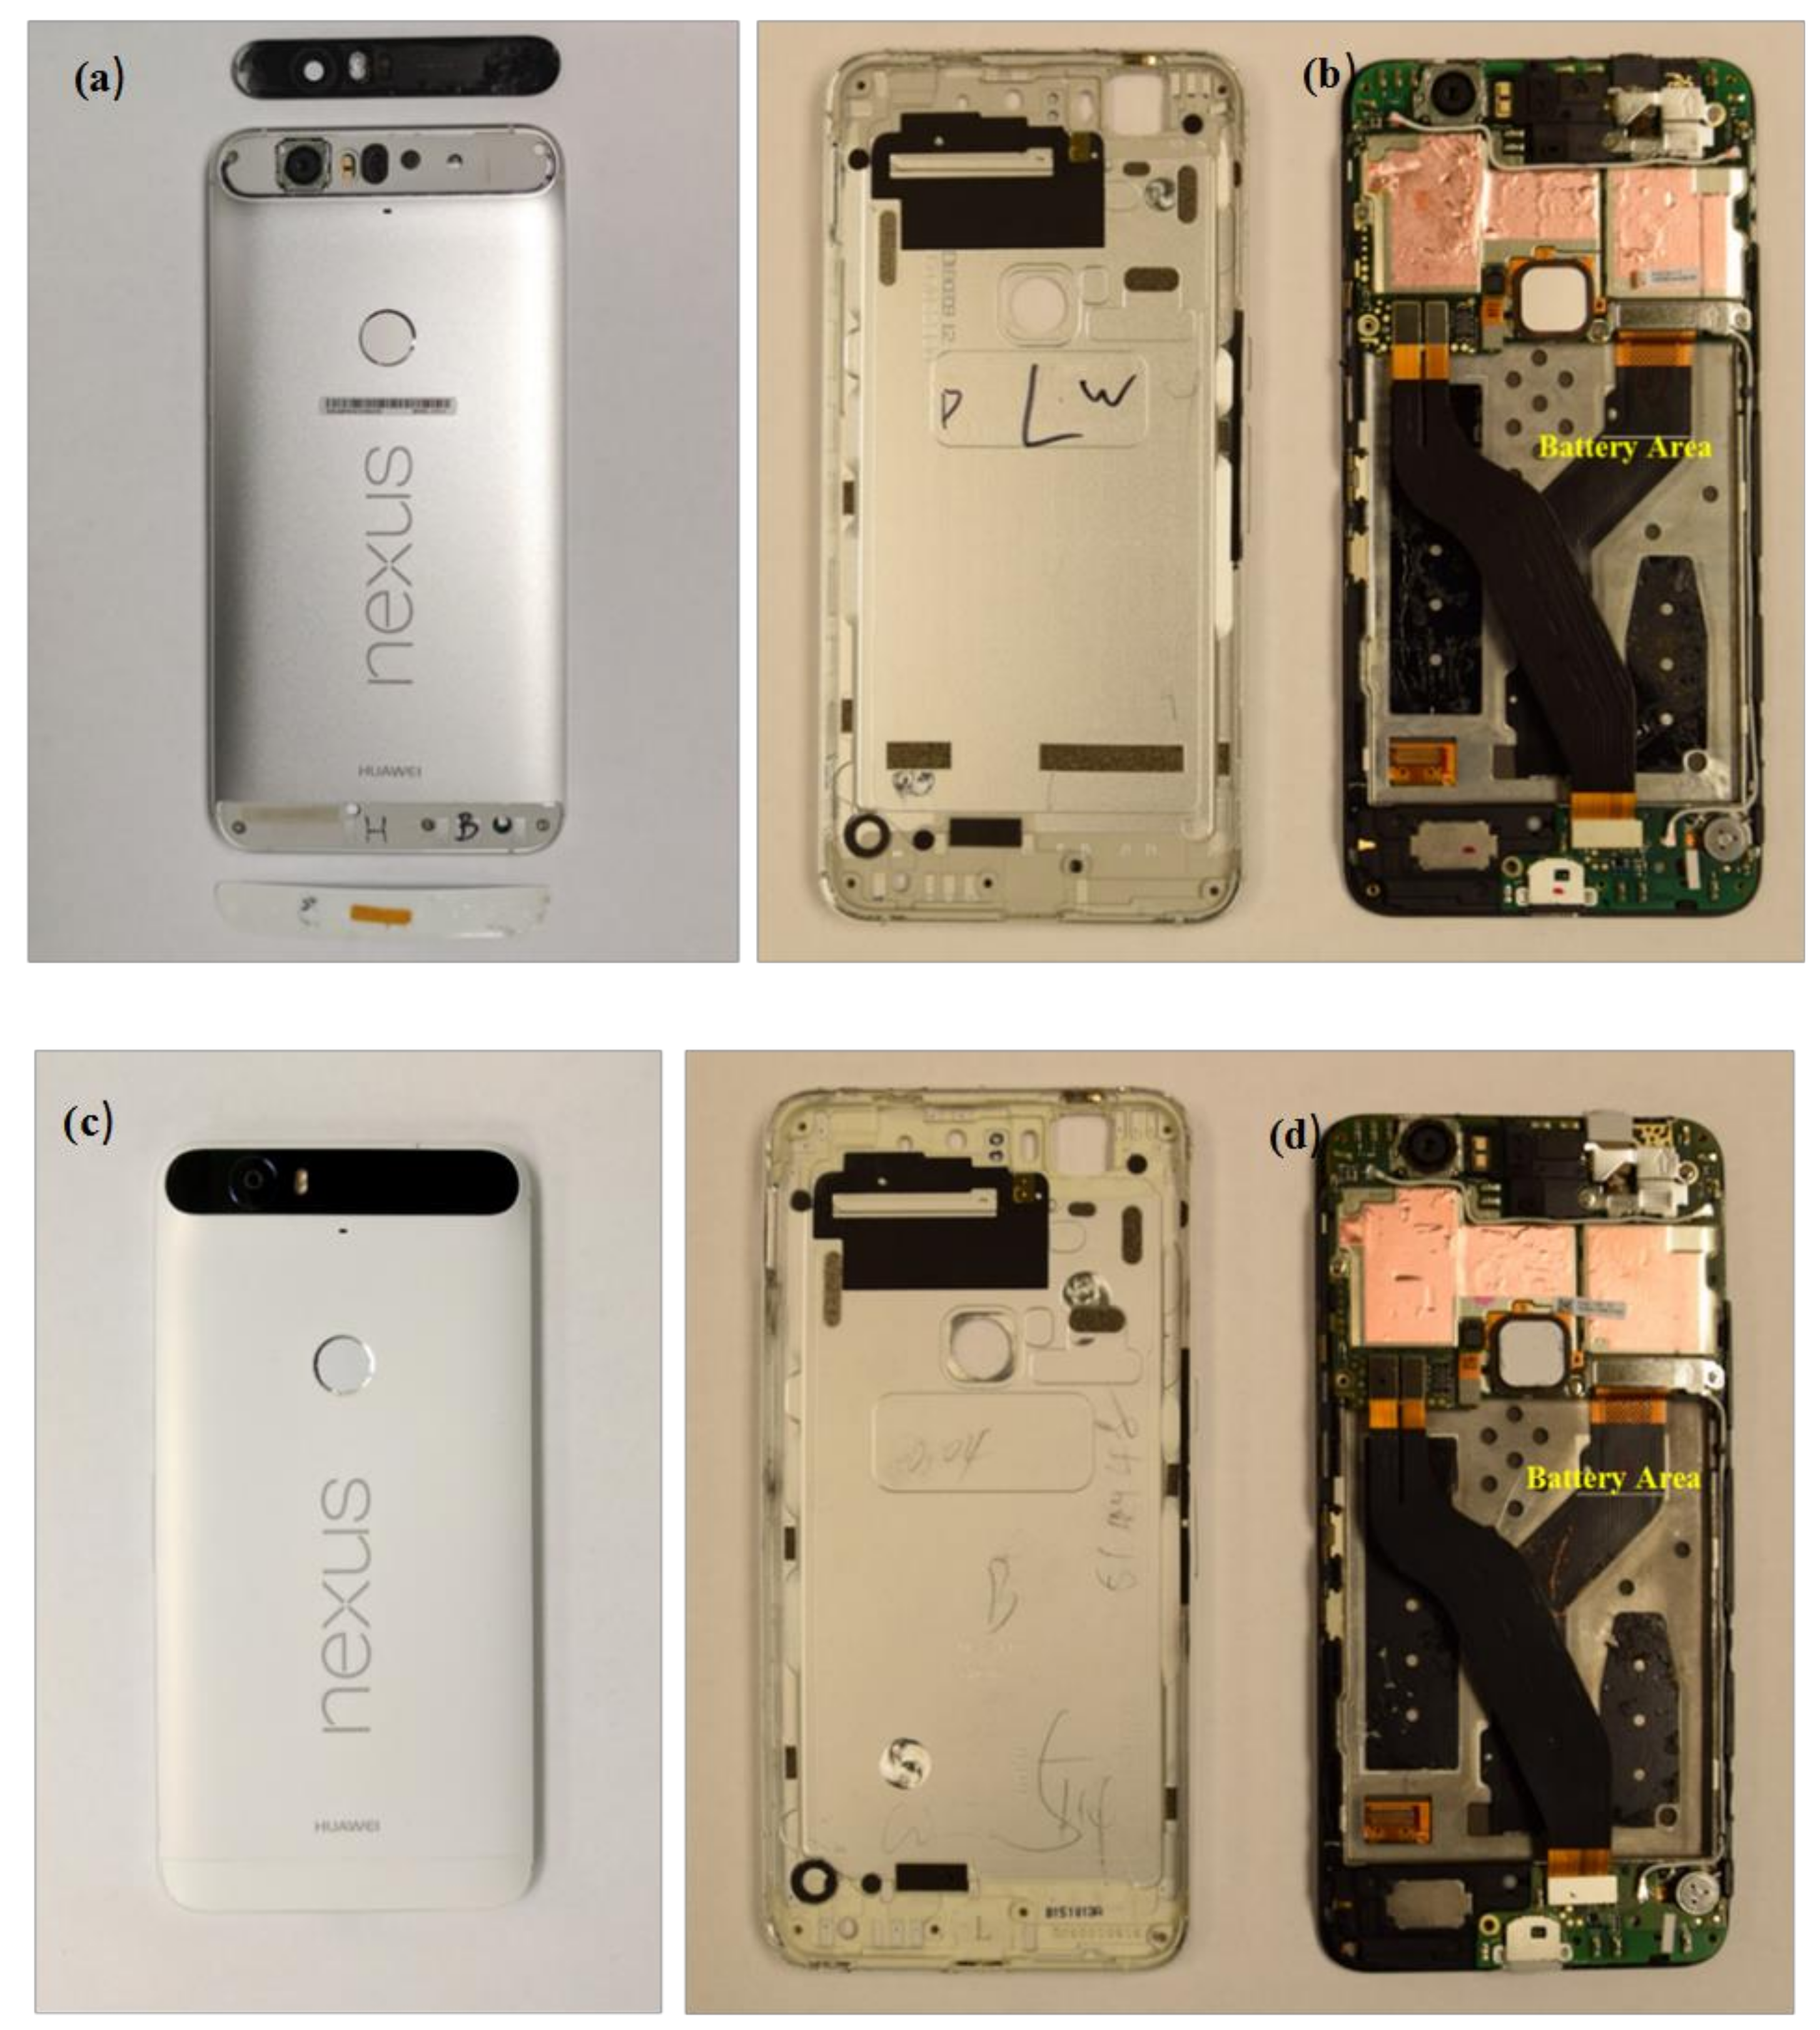 Energies Free Full Text A Unique Failure Mechanism In The Nexus 6p Lithium Ion Battery Html